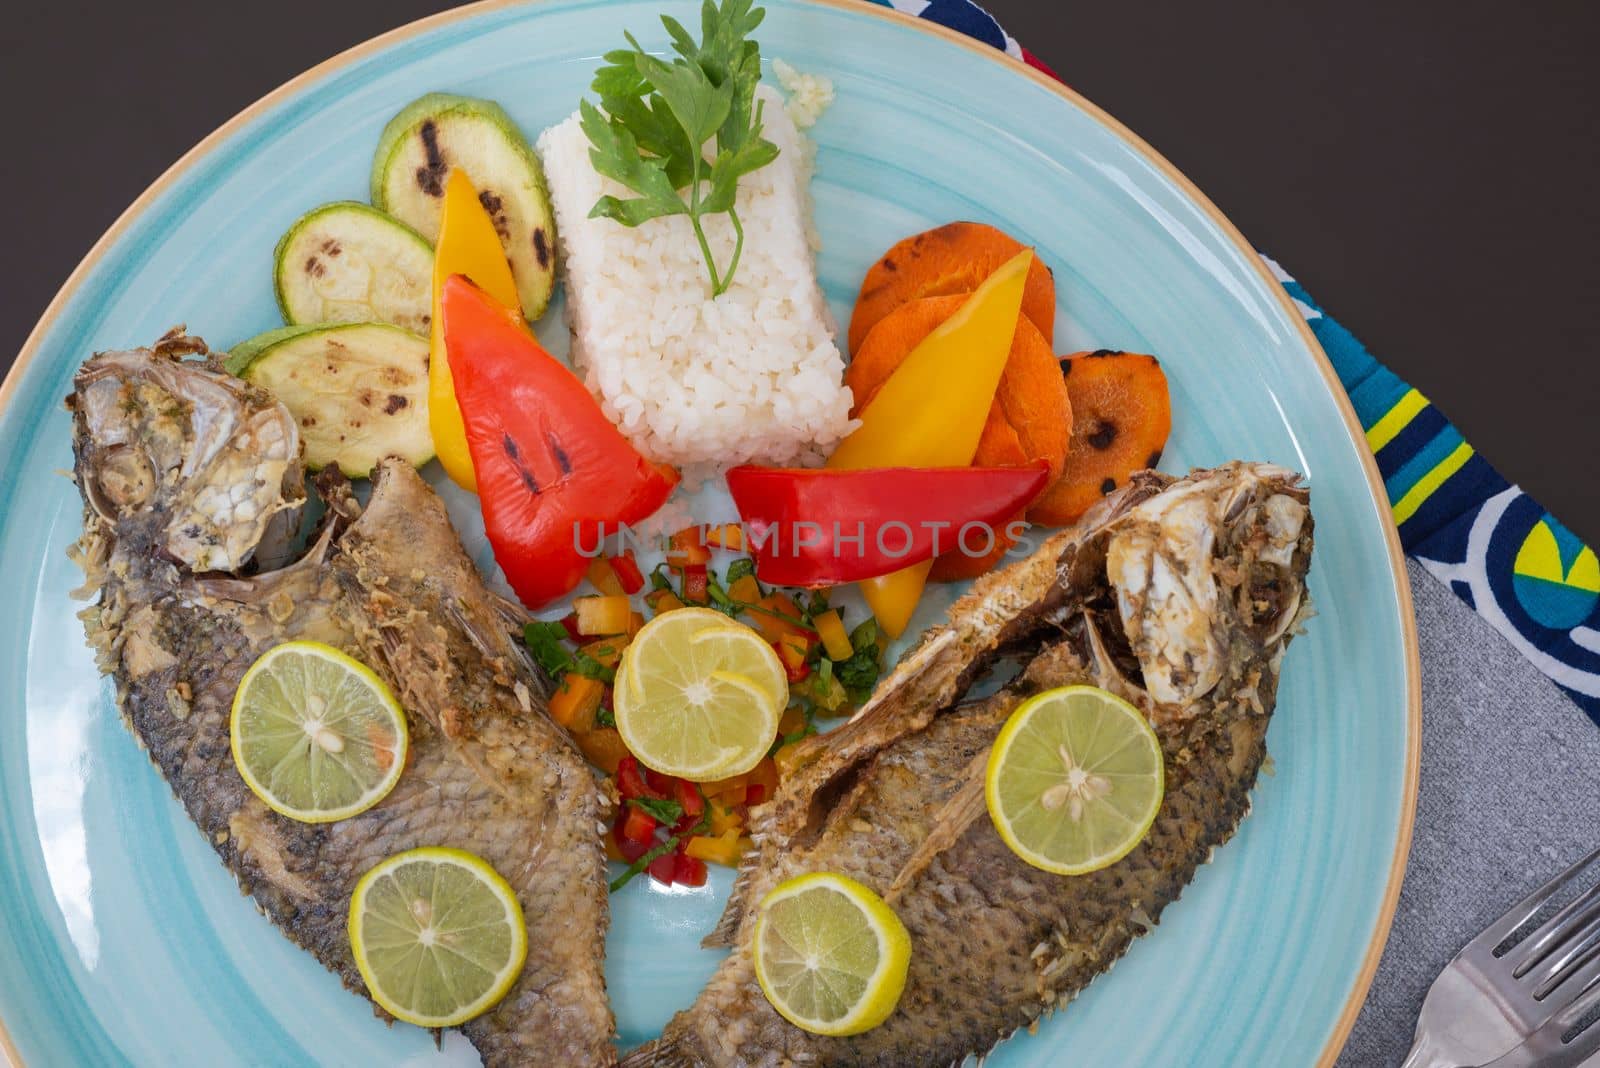 Grilled fish a la carte meal with white steamed rice on plate at restaurant table setting